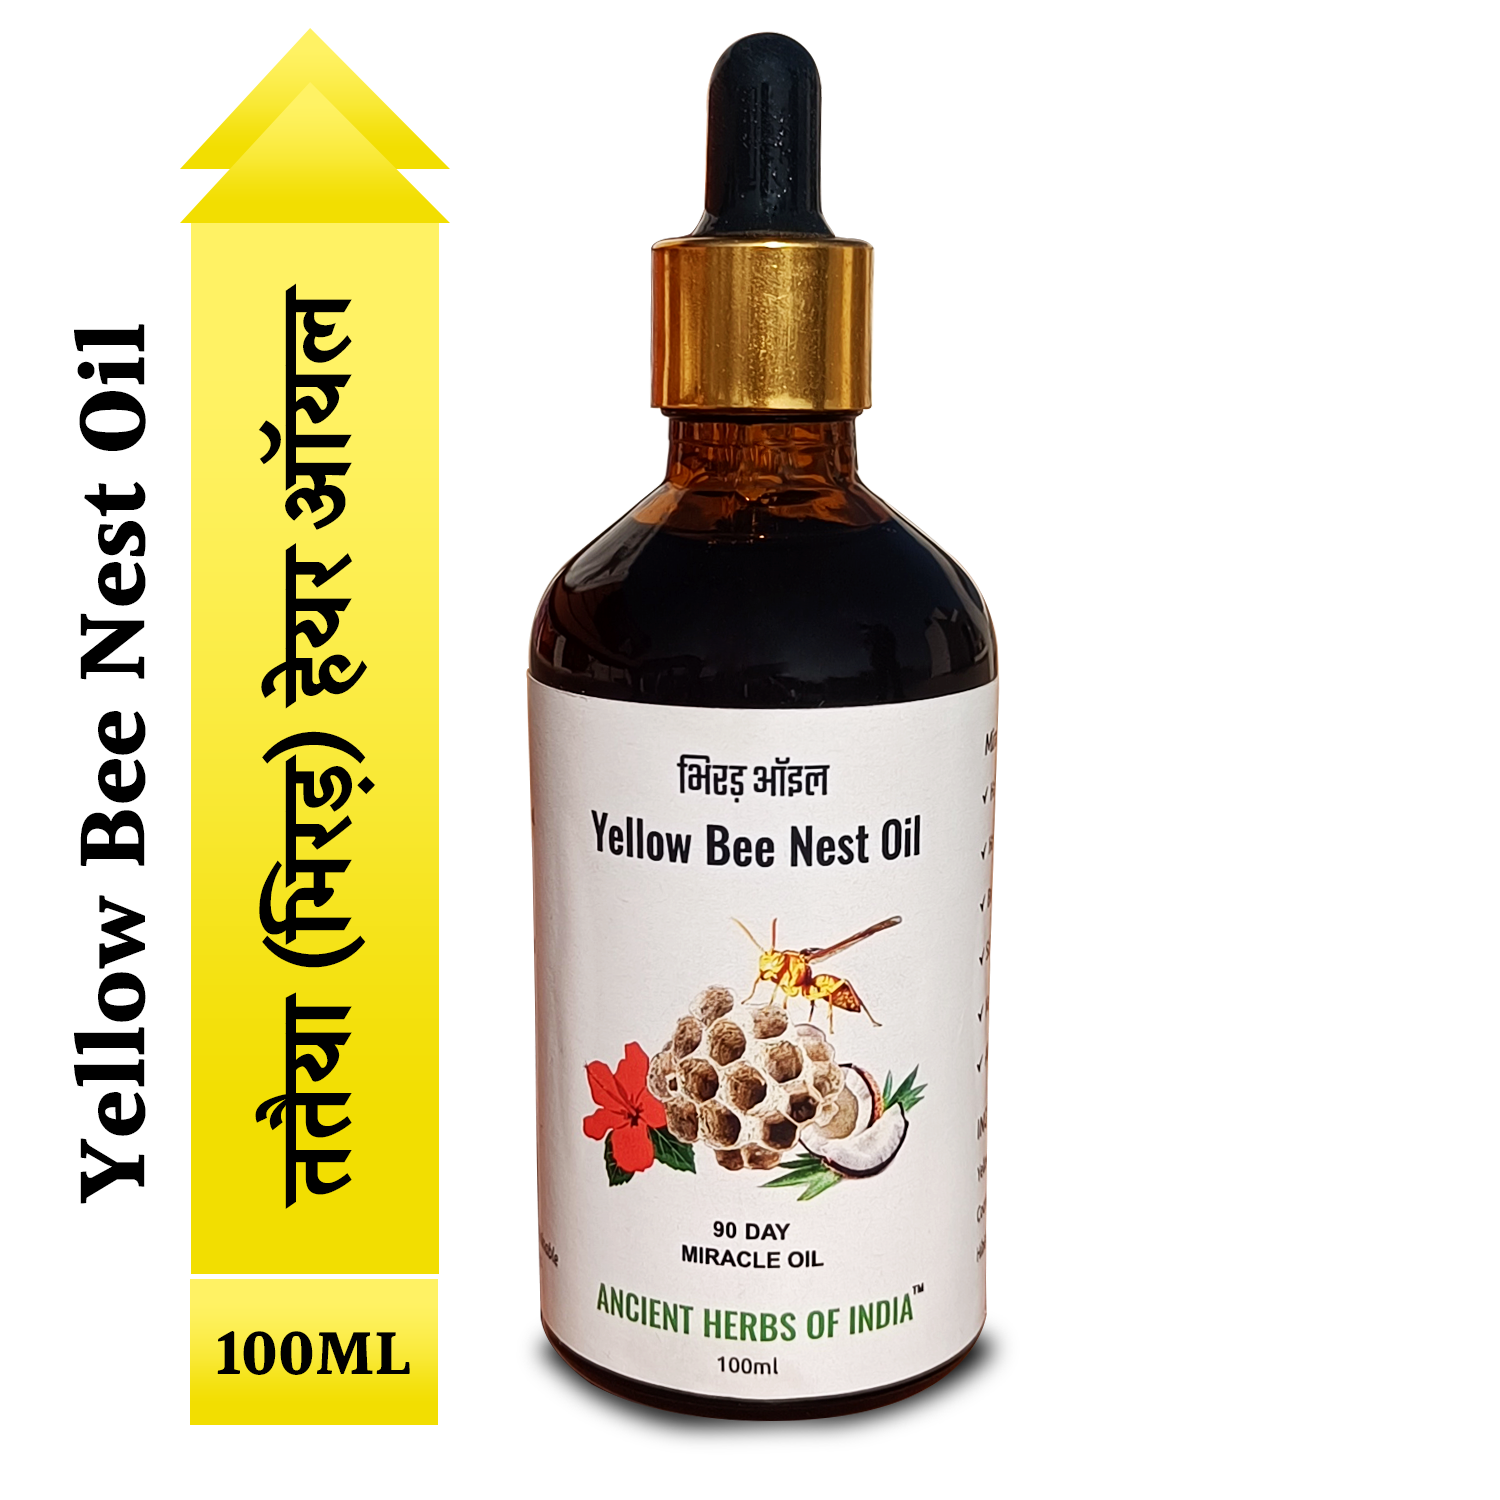 Ancient Herbs of India Yellow bee nest oil For Hair and Scalp Treatment and Hair Growth With Pack of 4 for Third Stage of Baldness